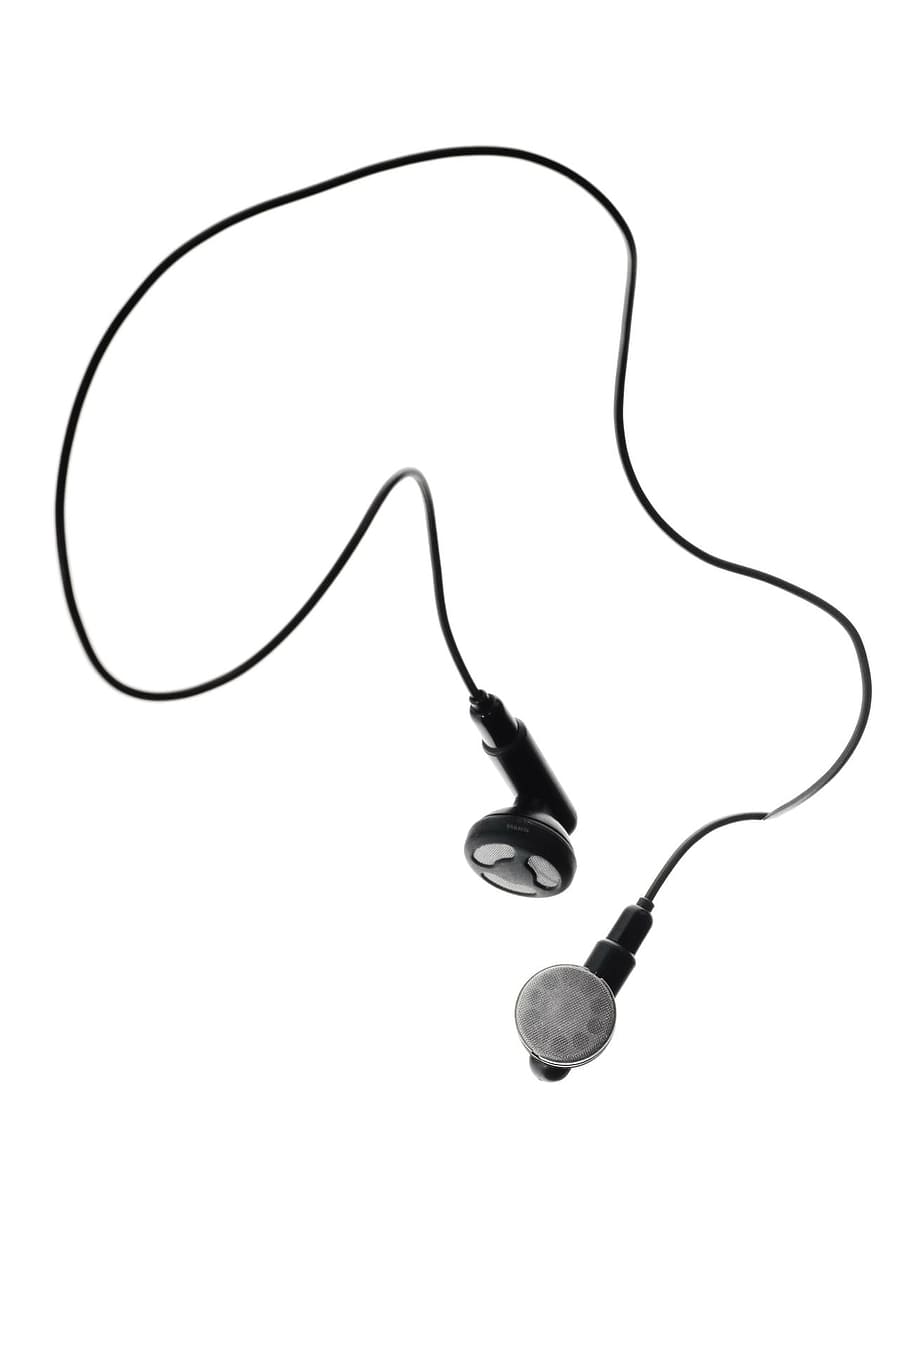 audio, cable, close-up, ear-bud, earbud, earphones, electronics, headphones, isolated, sound